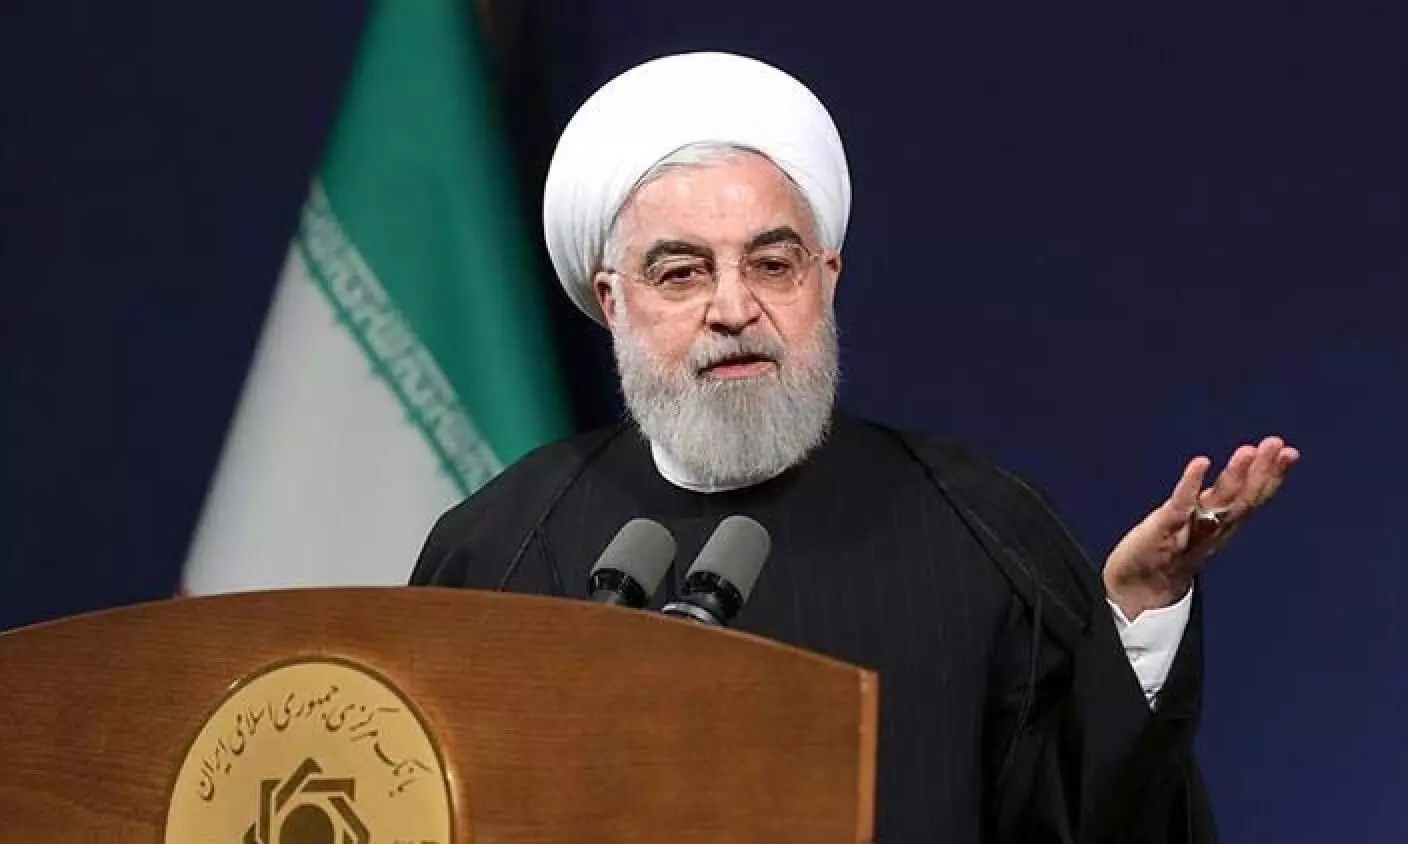 This move is incorrect, wrong and totally reprehensible says Iran President Hassan Rouhani on UAE-Israel deal